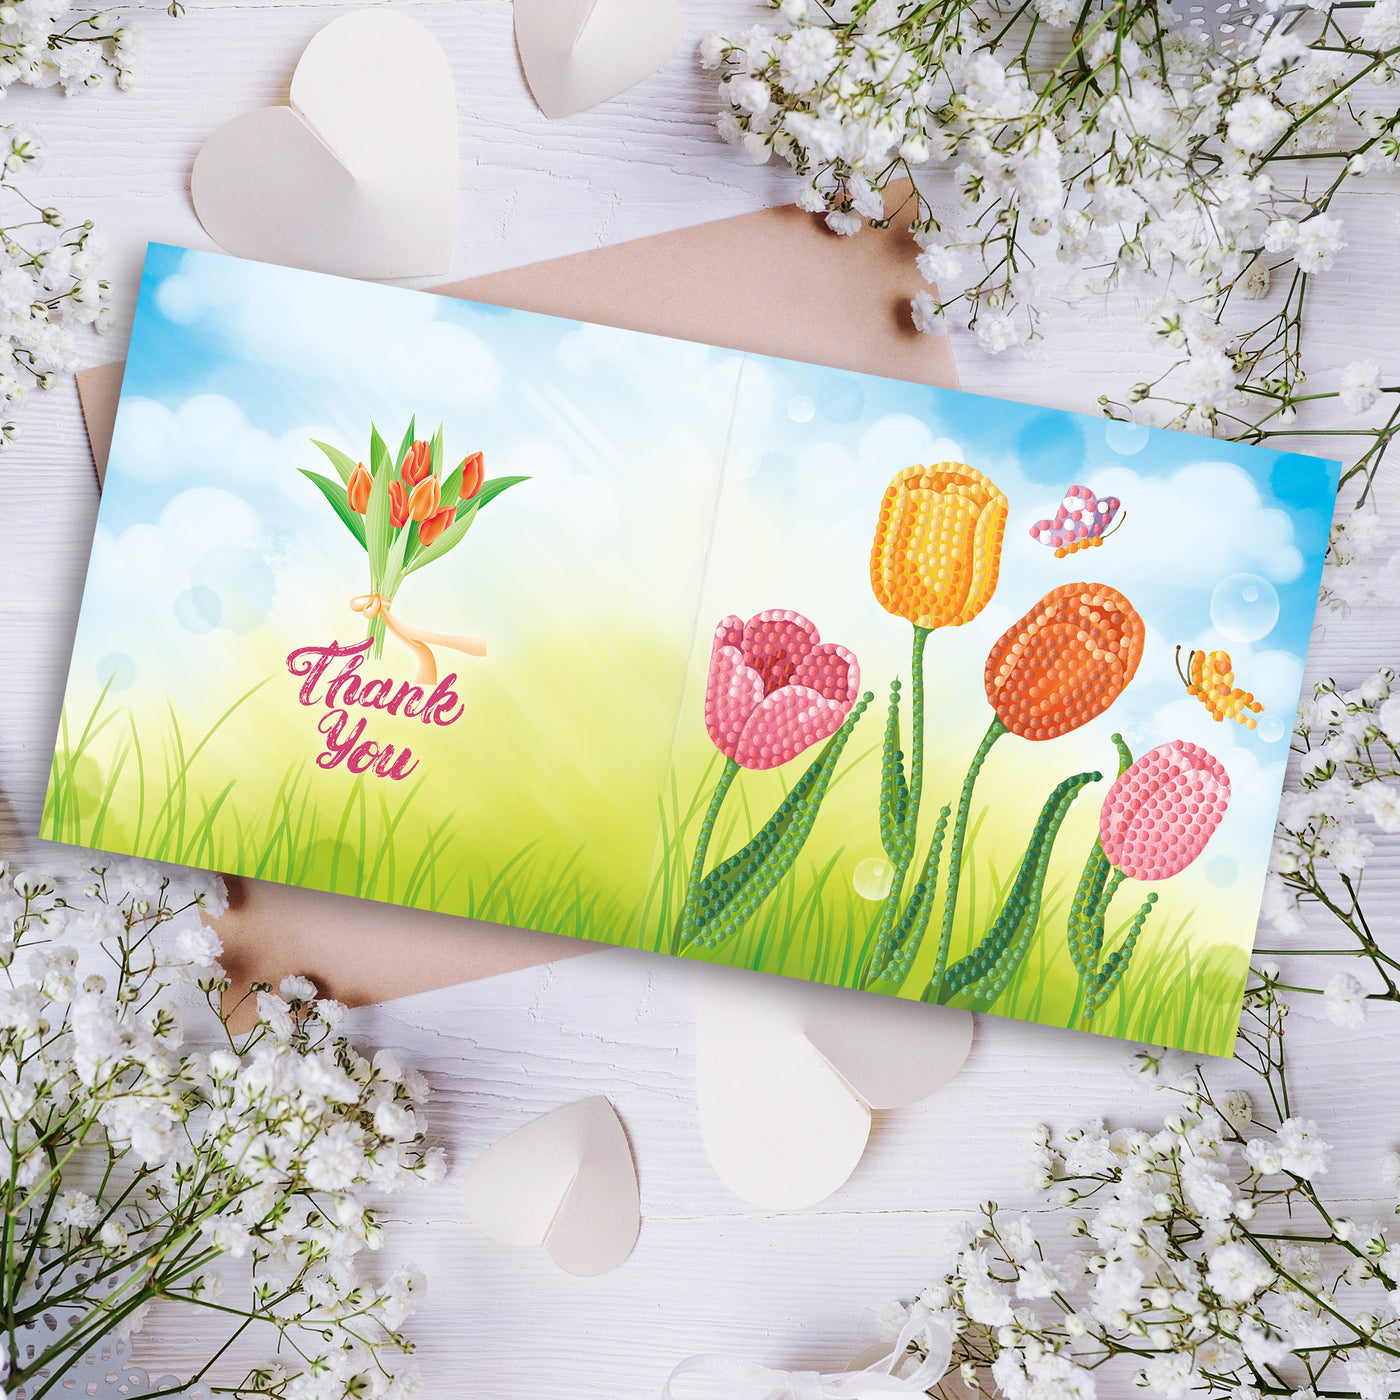 Set of 8 Flowers Greeting Cards Set A